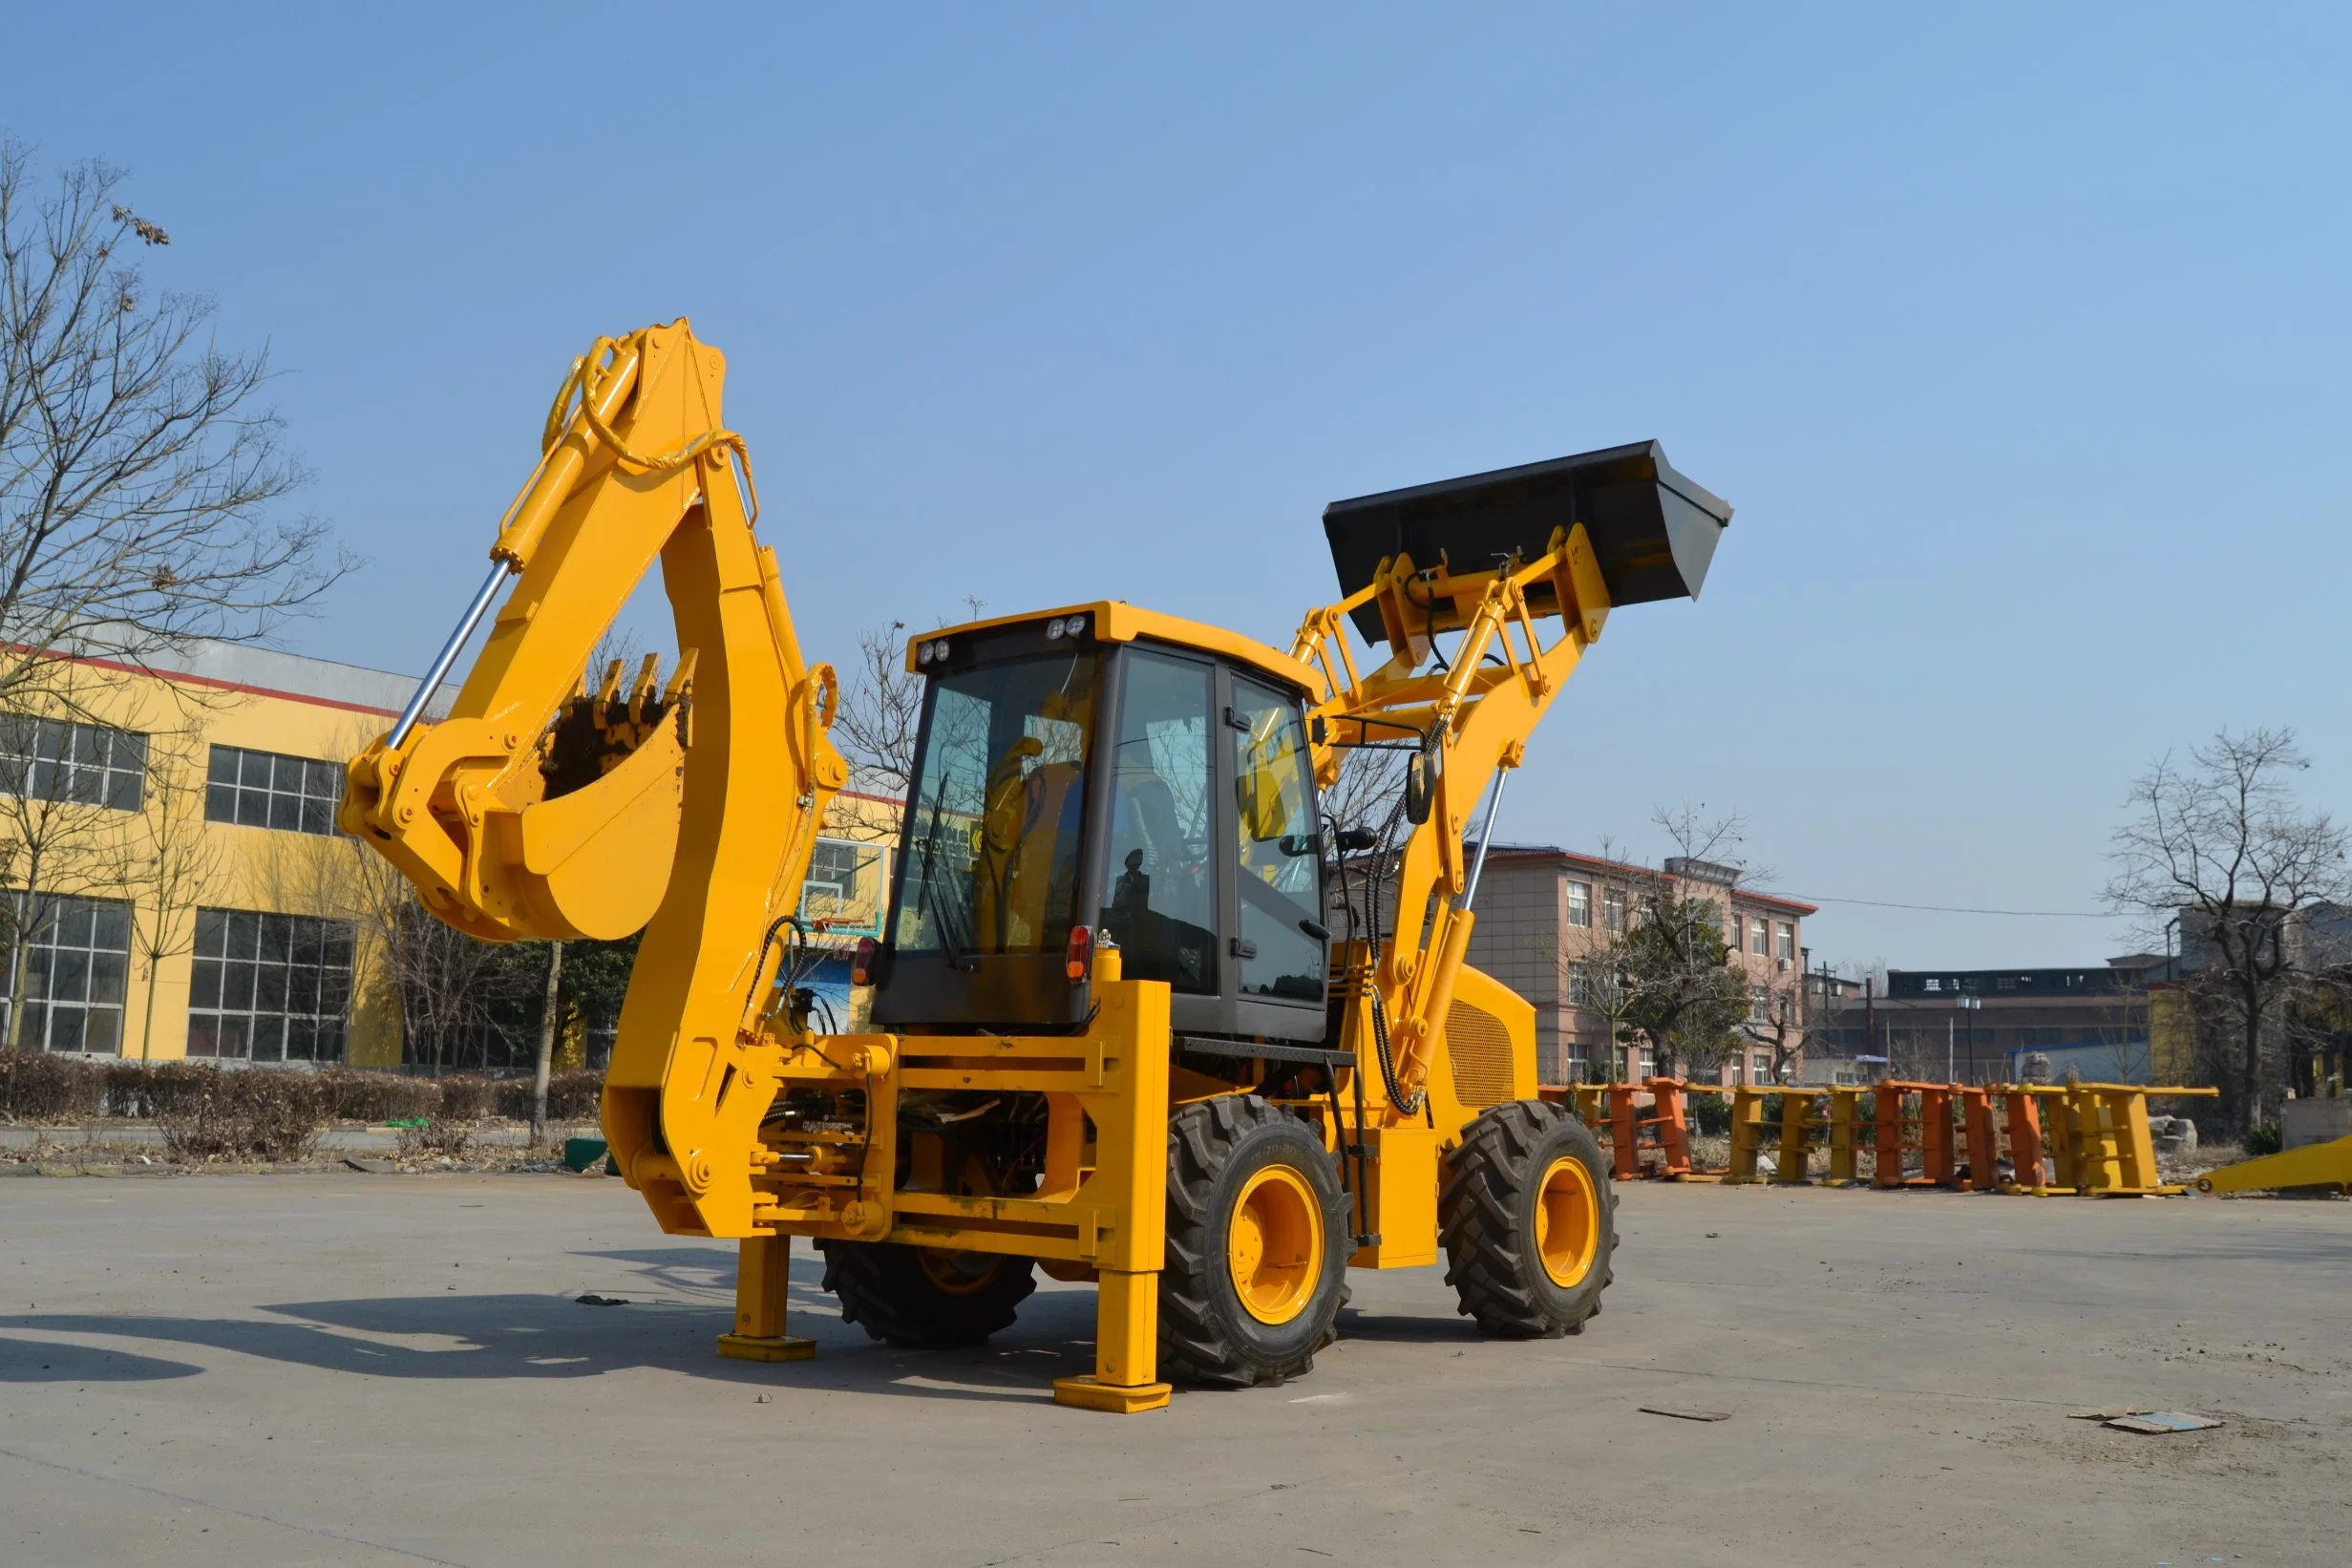 Forload Backhoe Excavator with Digging Bucket, Mini 50HP Tractor with Tlb of Wz30-25 Model